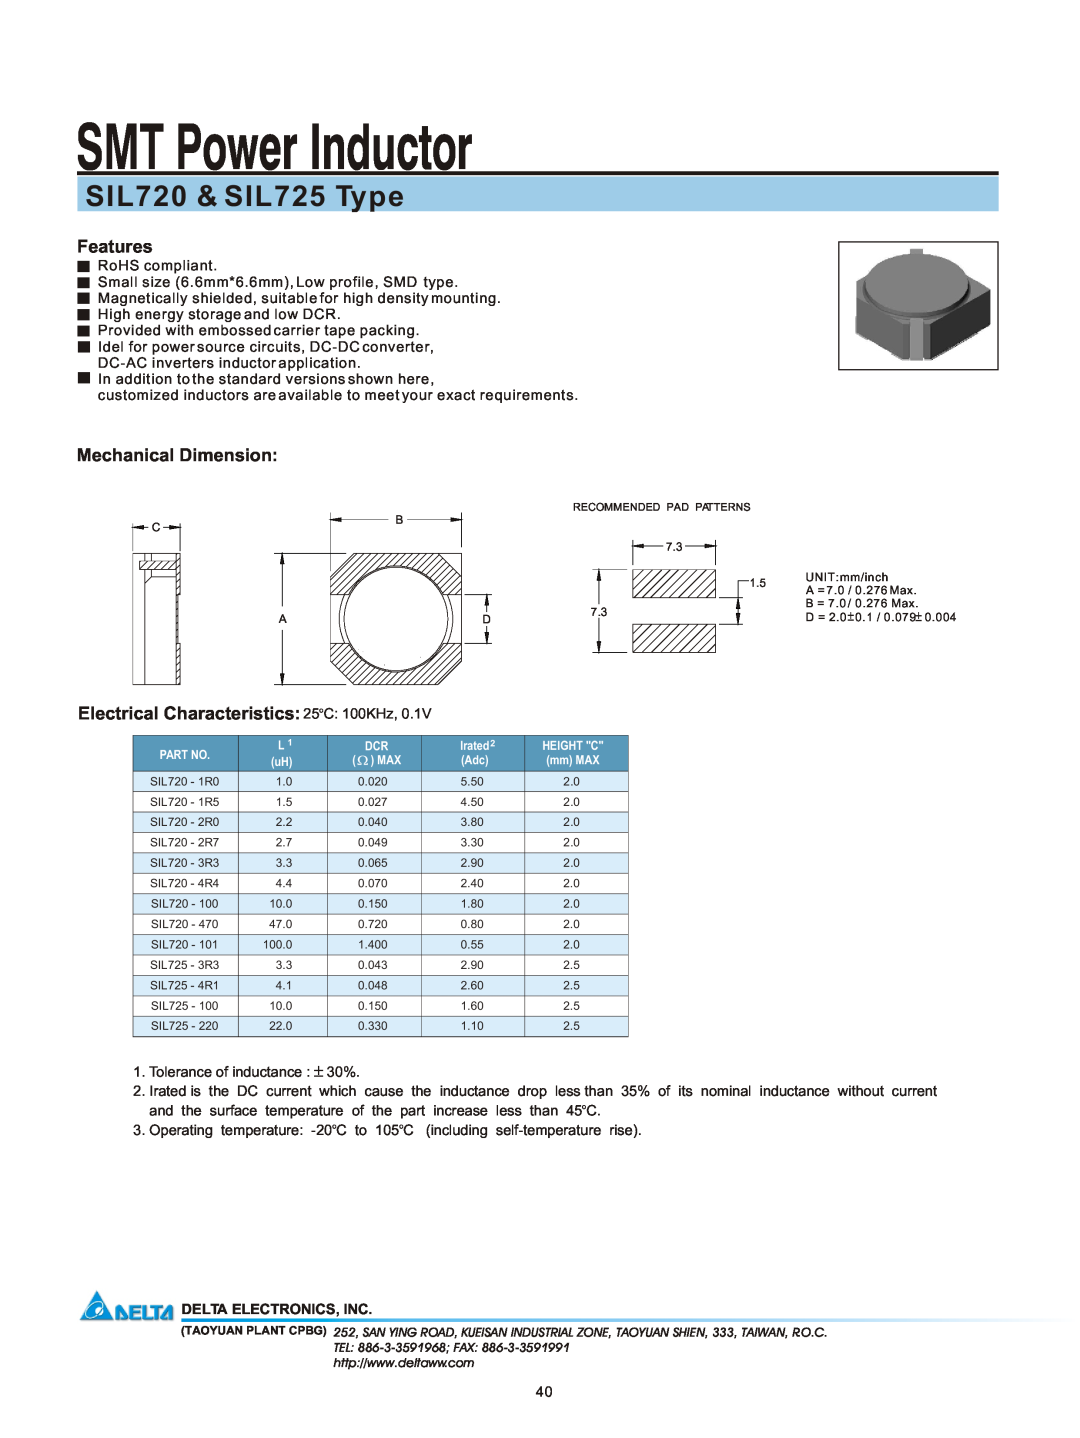 Delta Electronics manual SMT Power Inductor, SIL720 & SIL725 Type, Features, Mechanical Dimension 